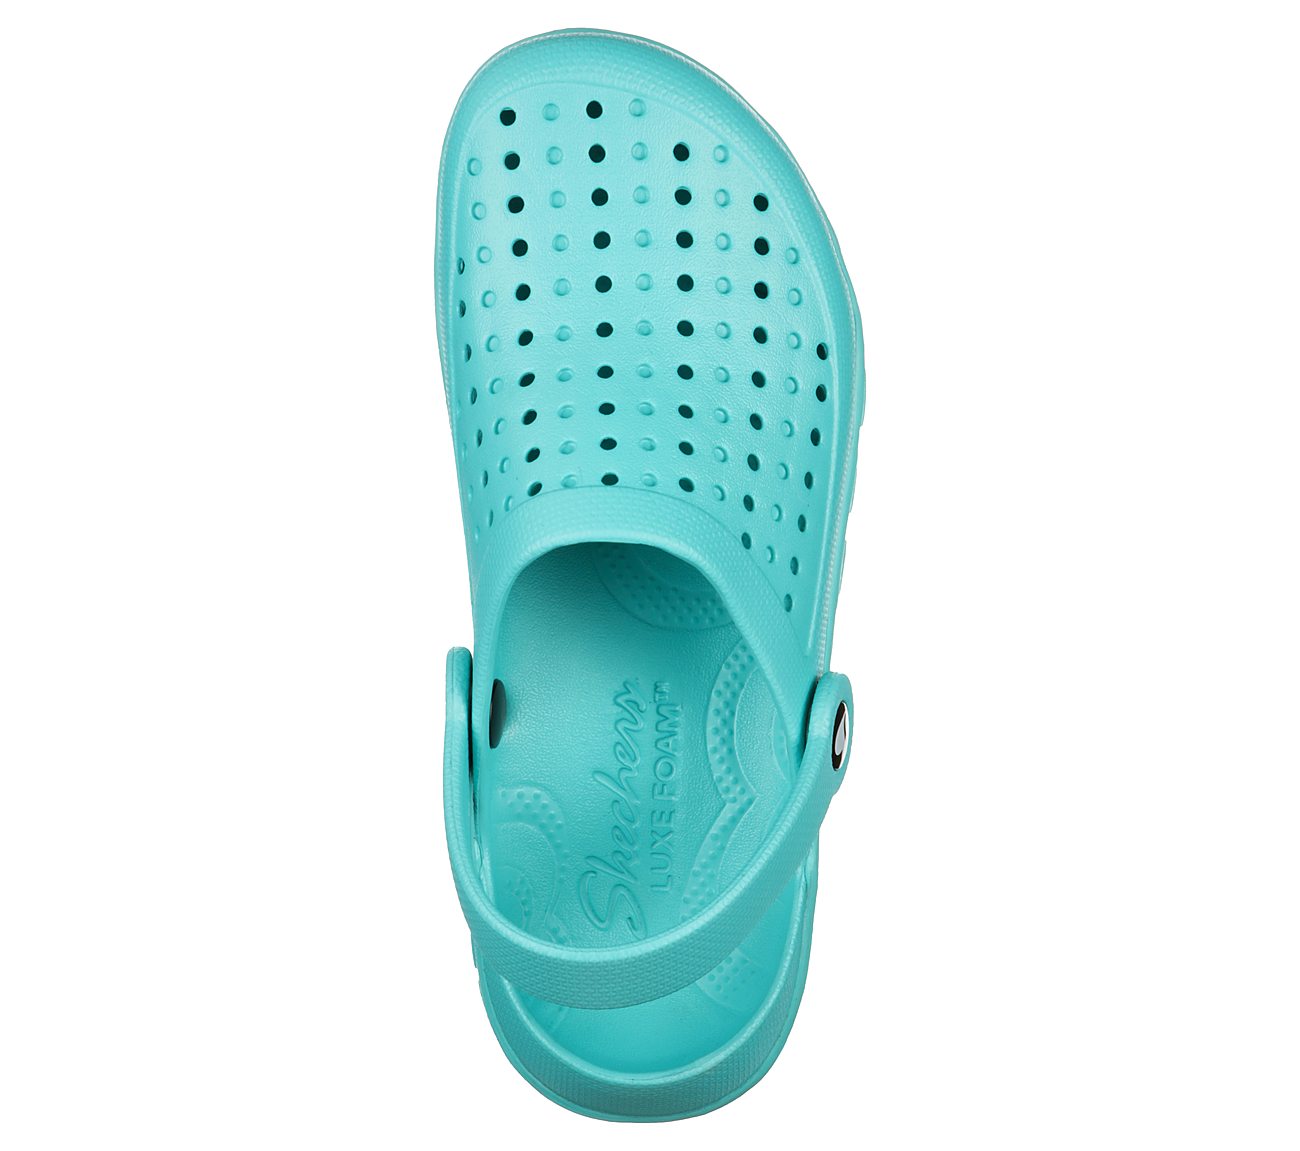 FOOTSTEPS - TRANSCEND, TURQUOISE Footwear Top View